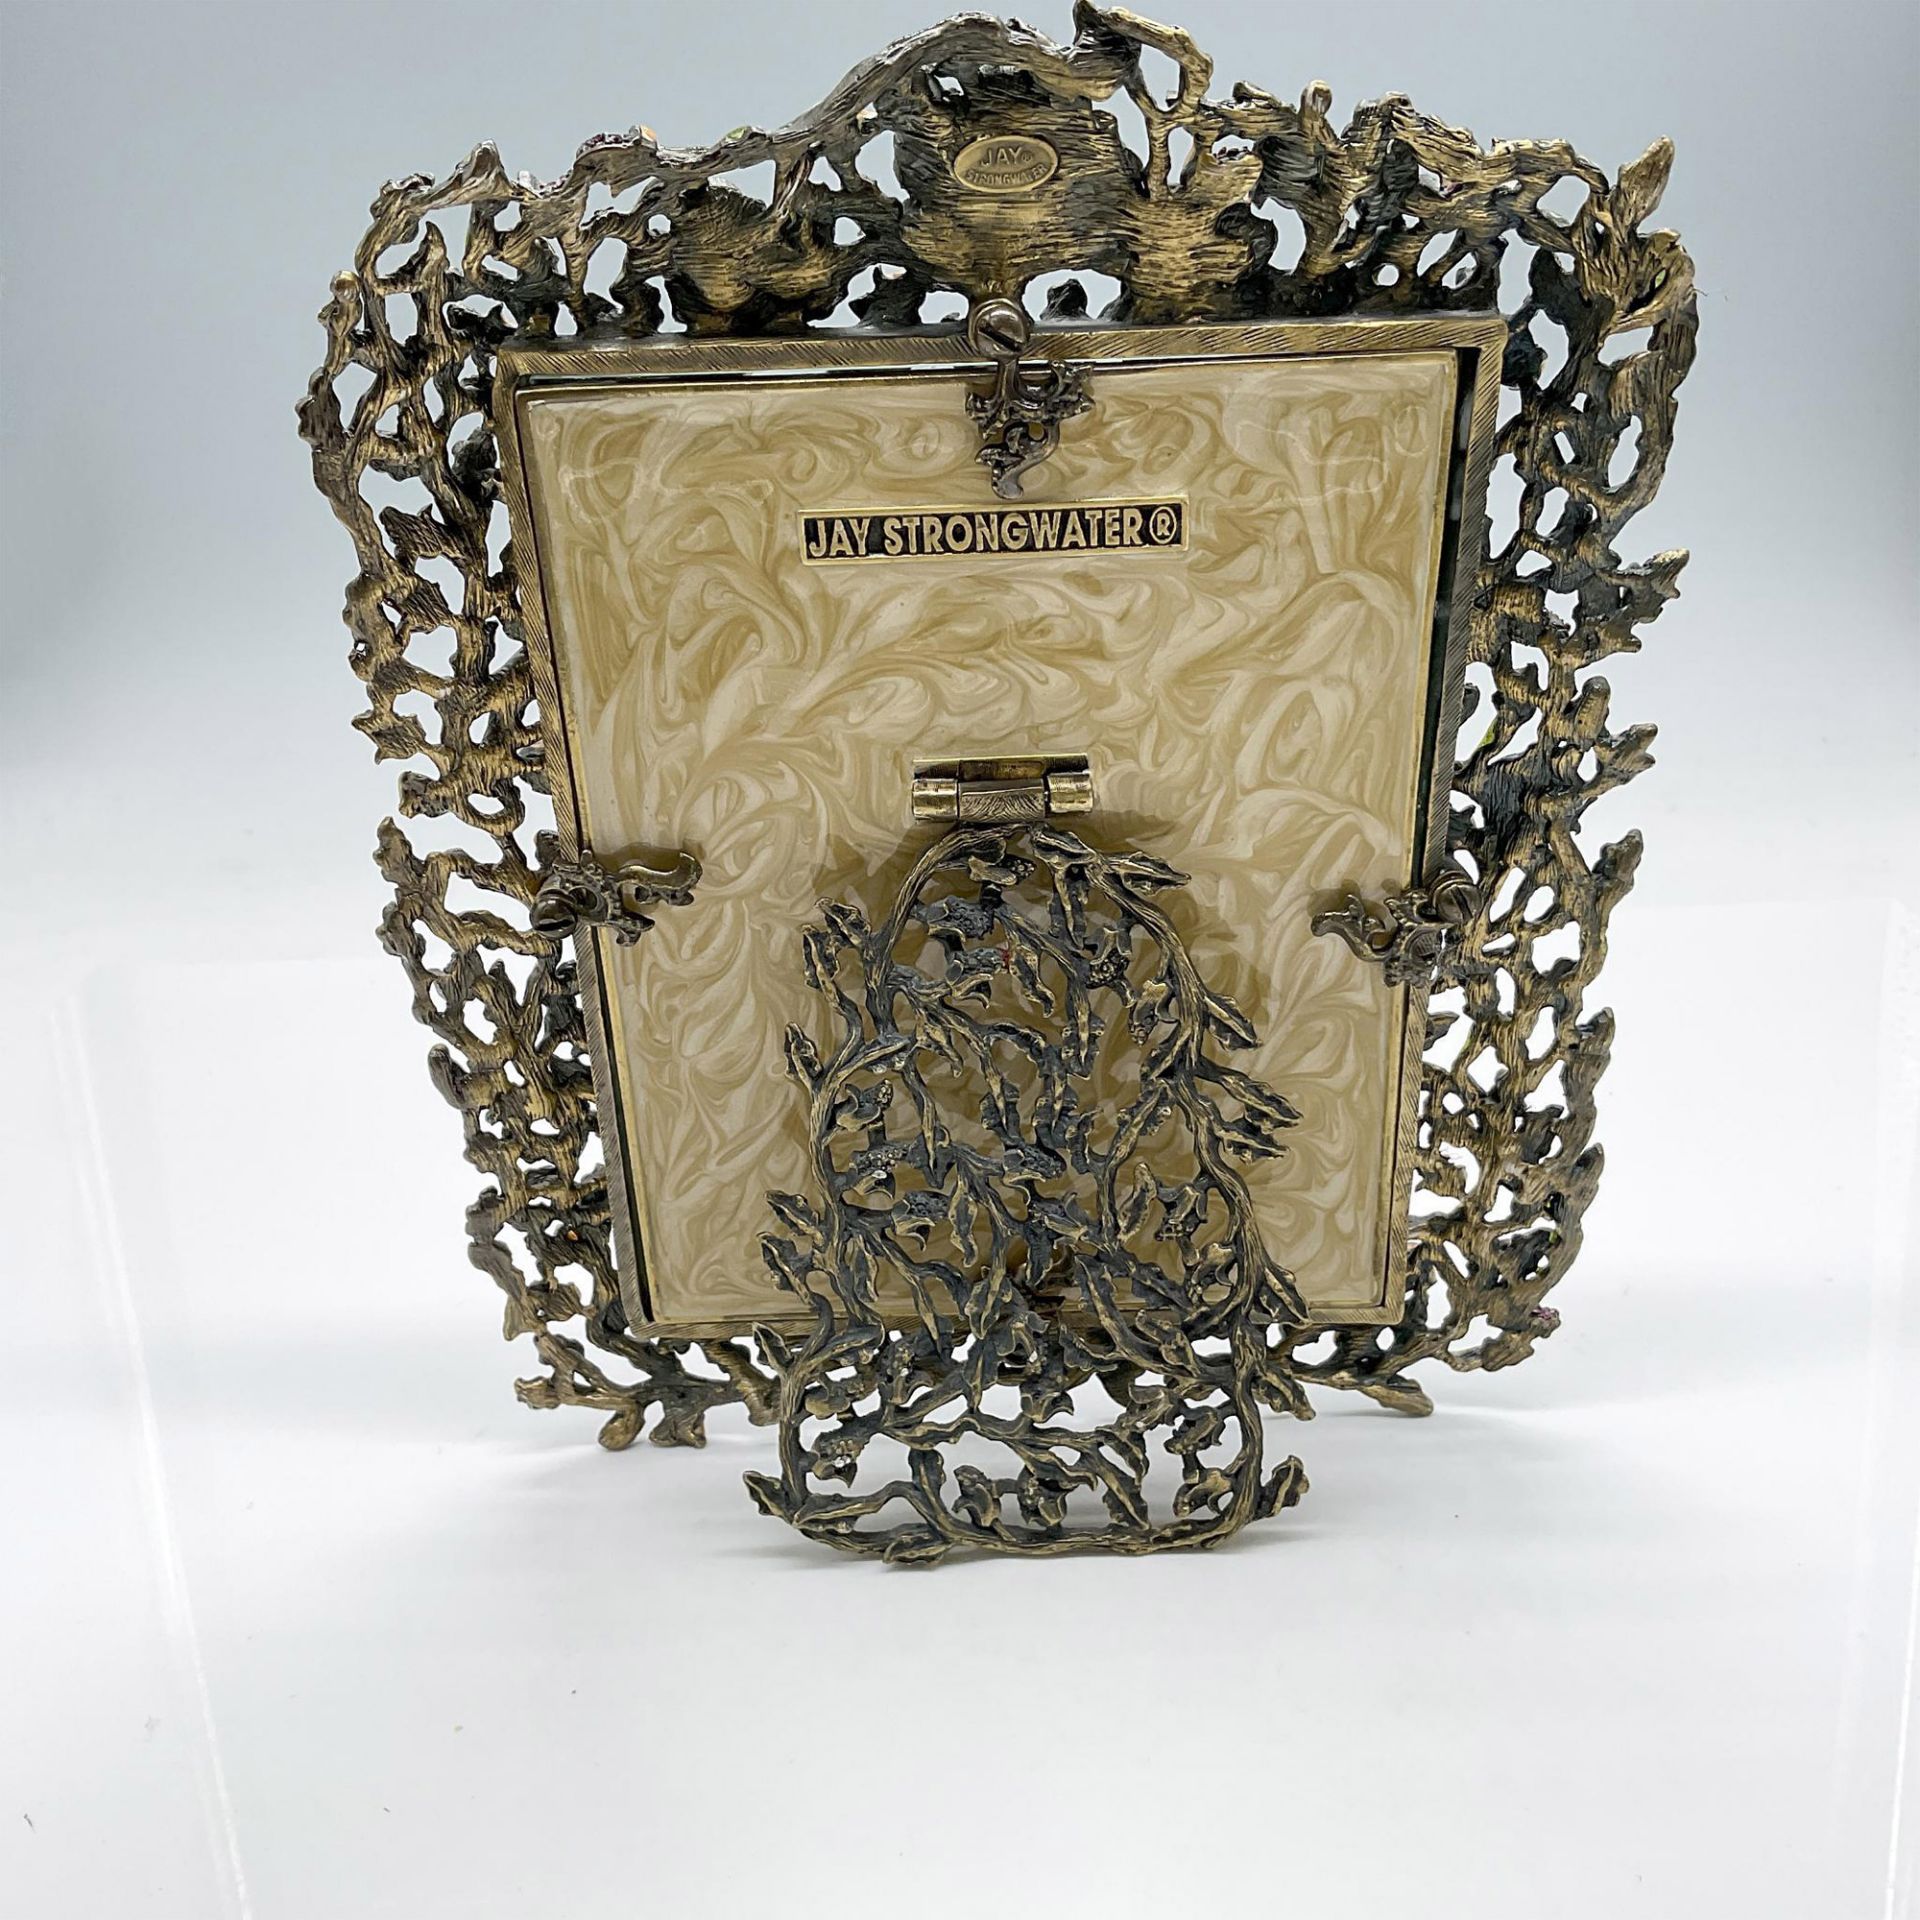 Jay Strongwater Enamel and Crystal Picture Frame - Image 2 of 3